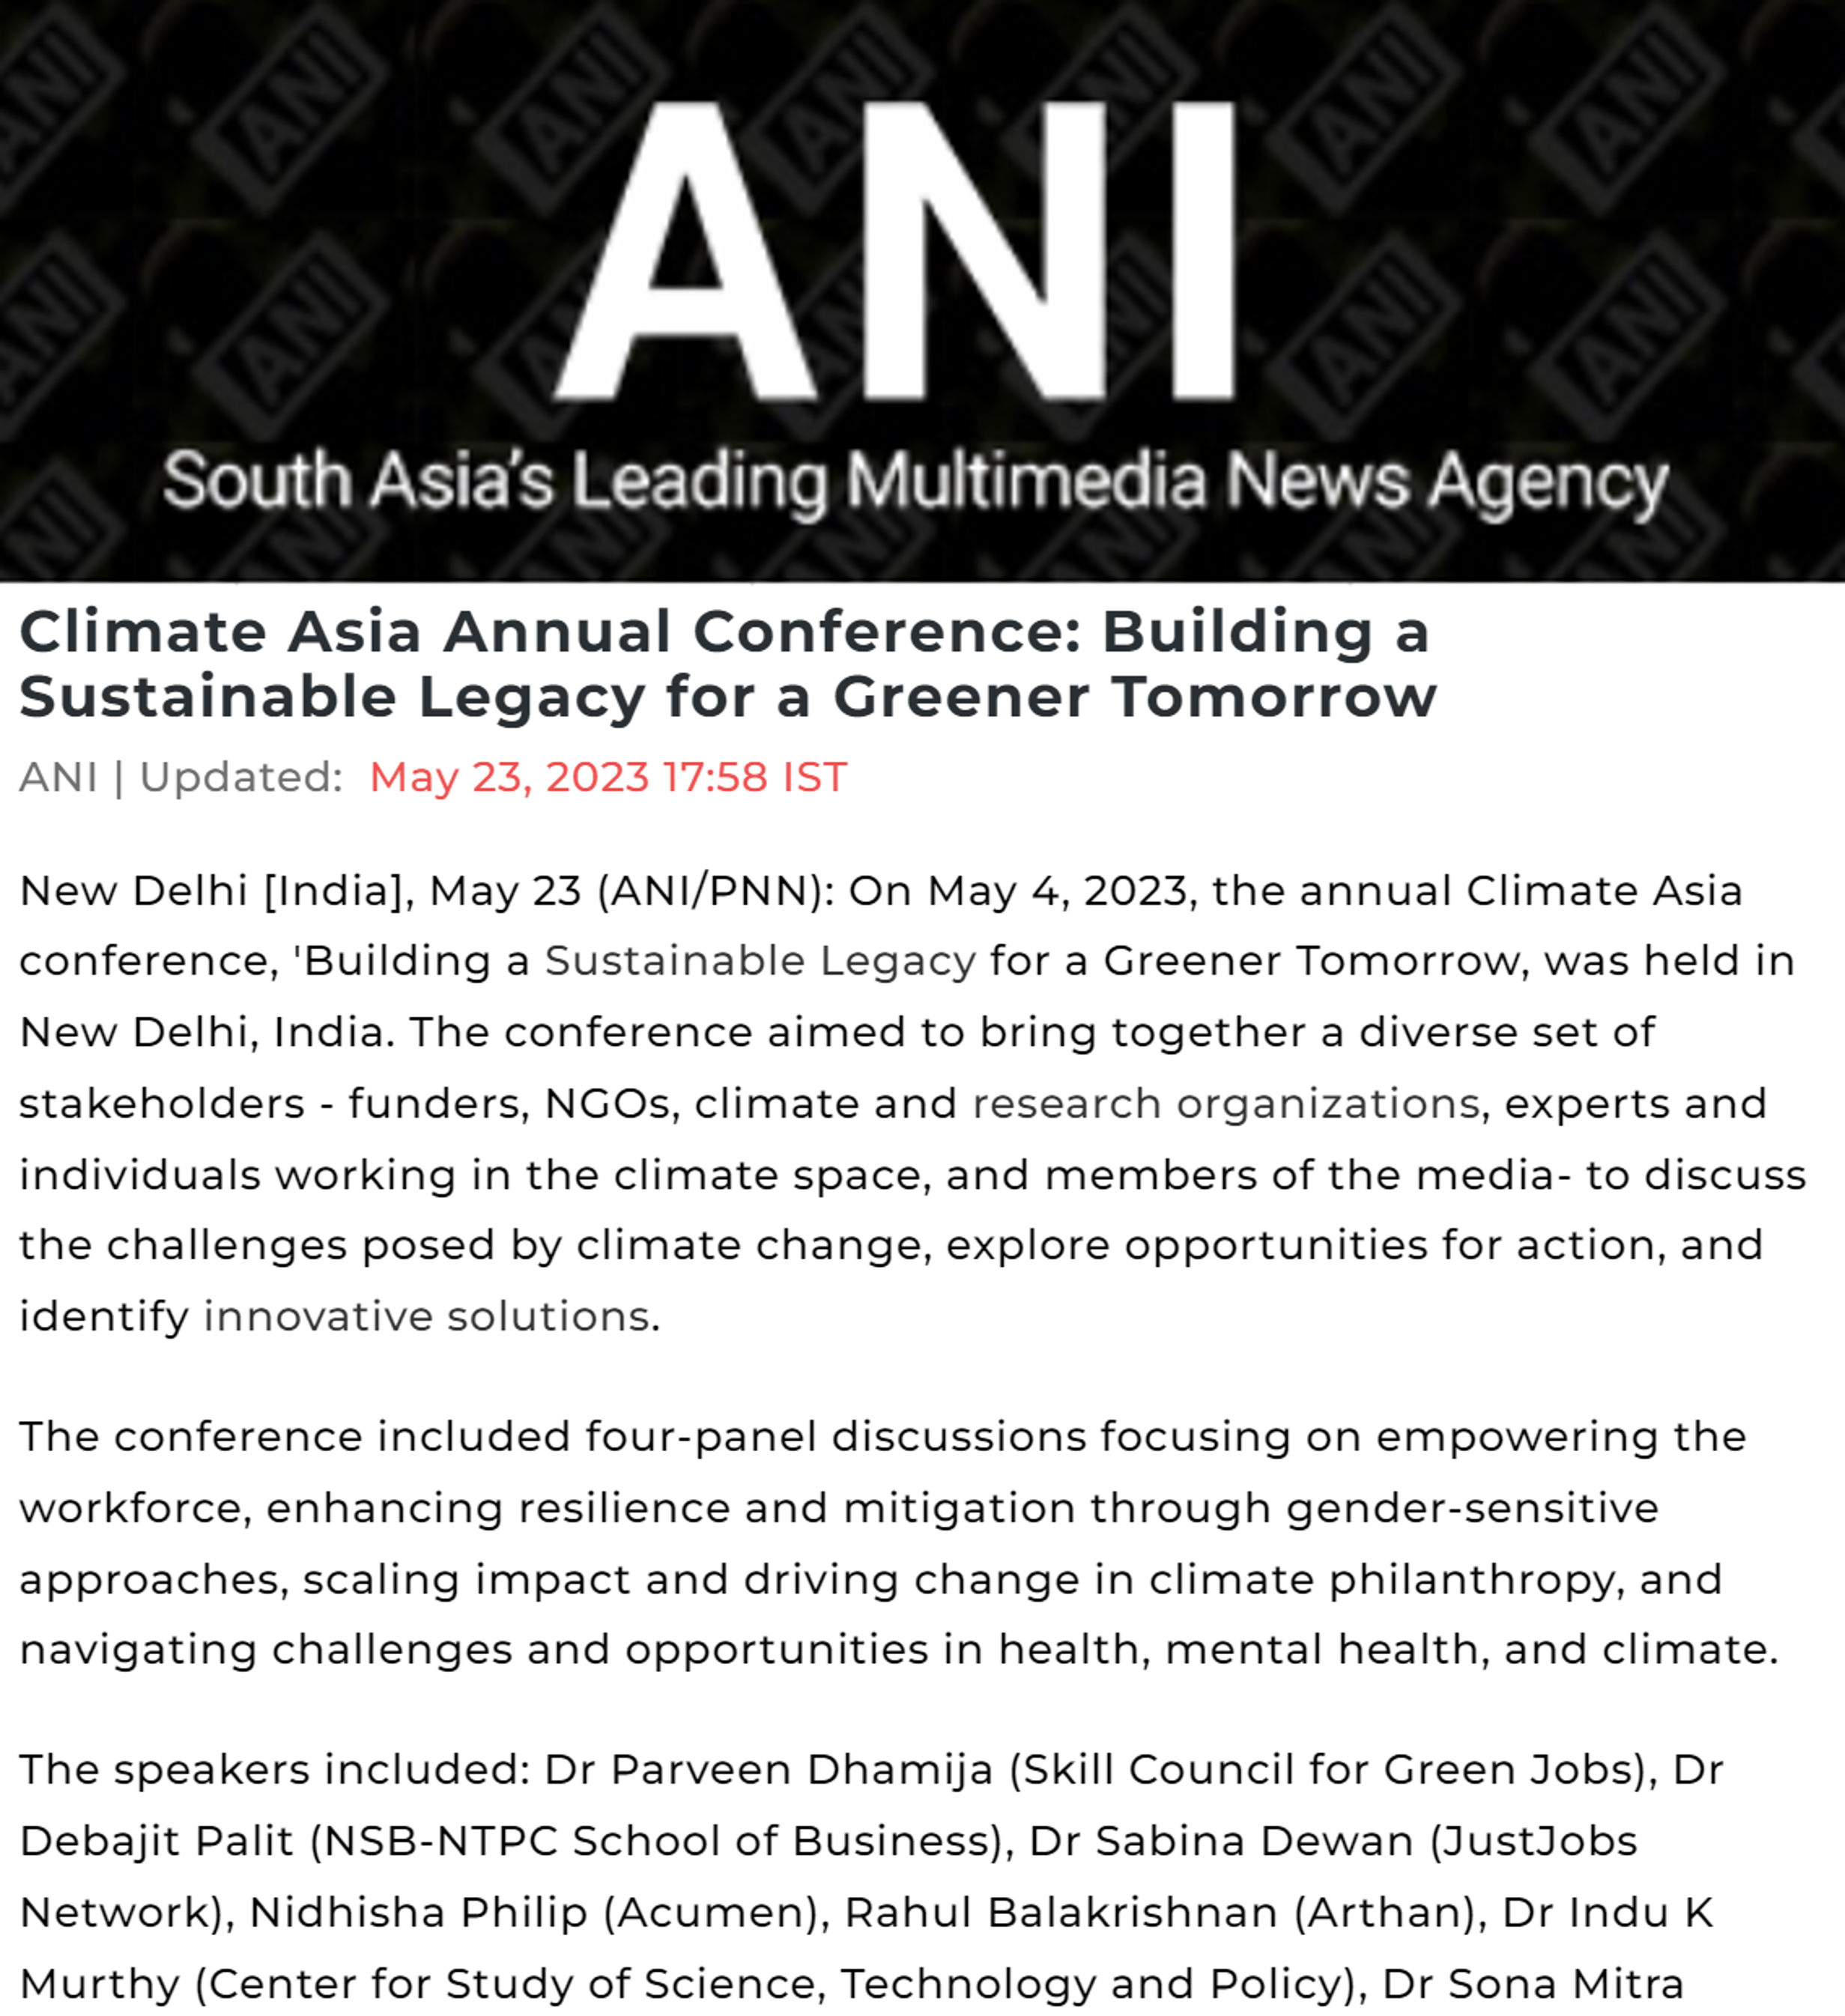 Dr Indu K Murthy mentioned as a speaker at the annual Climate Asia conference by ANI